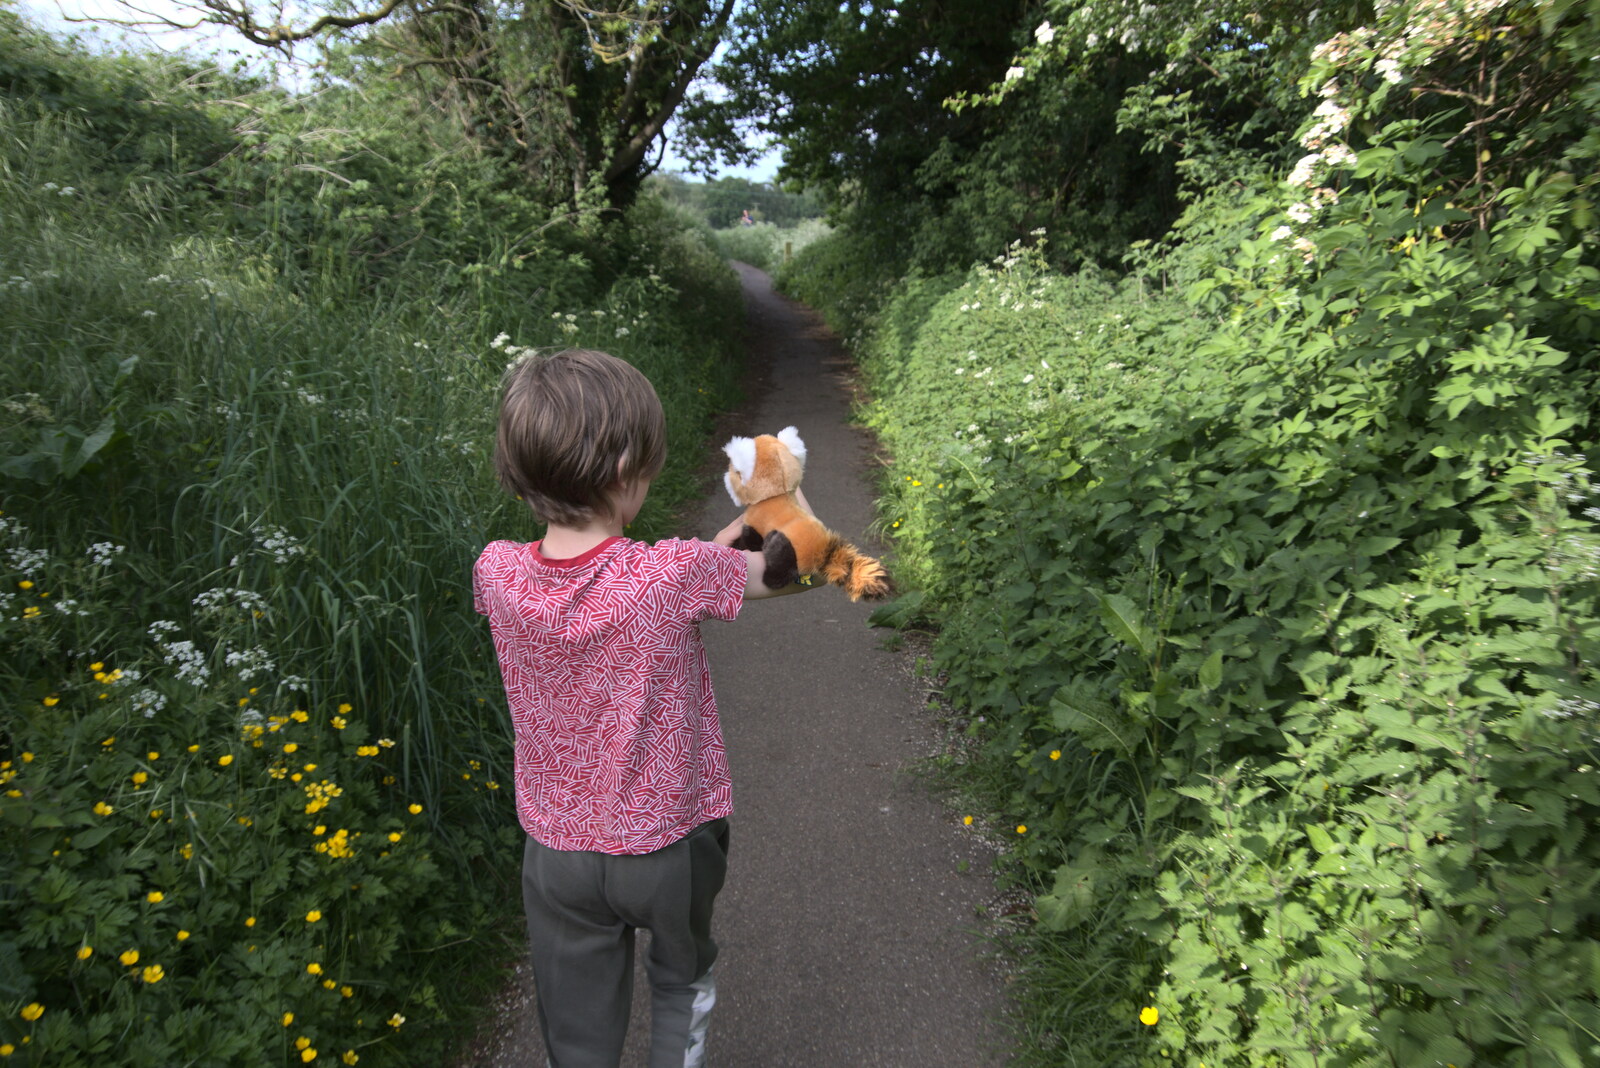 Harry takes his red panda down to the Lows in Diss from A Moth Infestation and a Trip to the Zoo, Banham, Norfolk - 21st May 2022